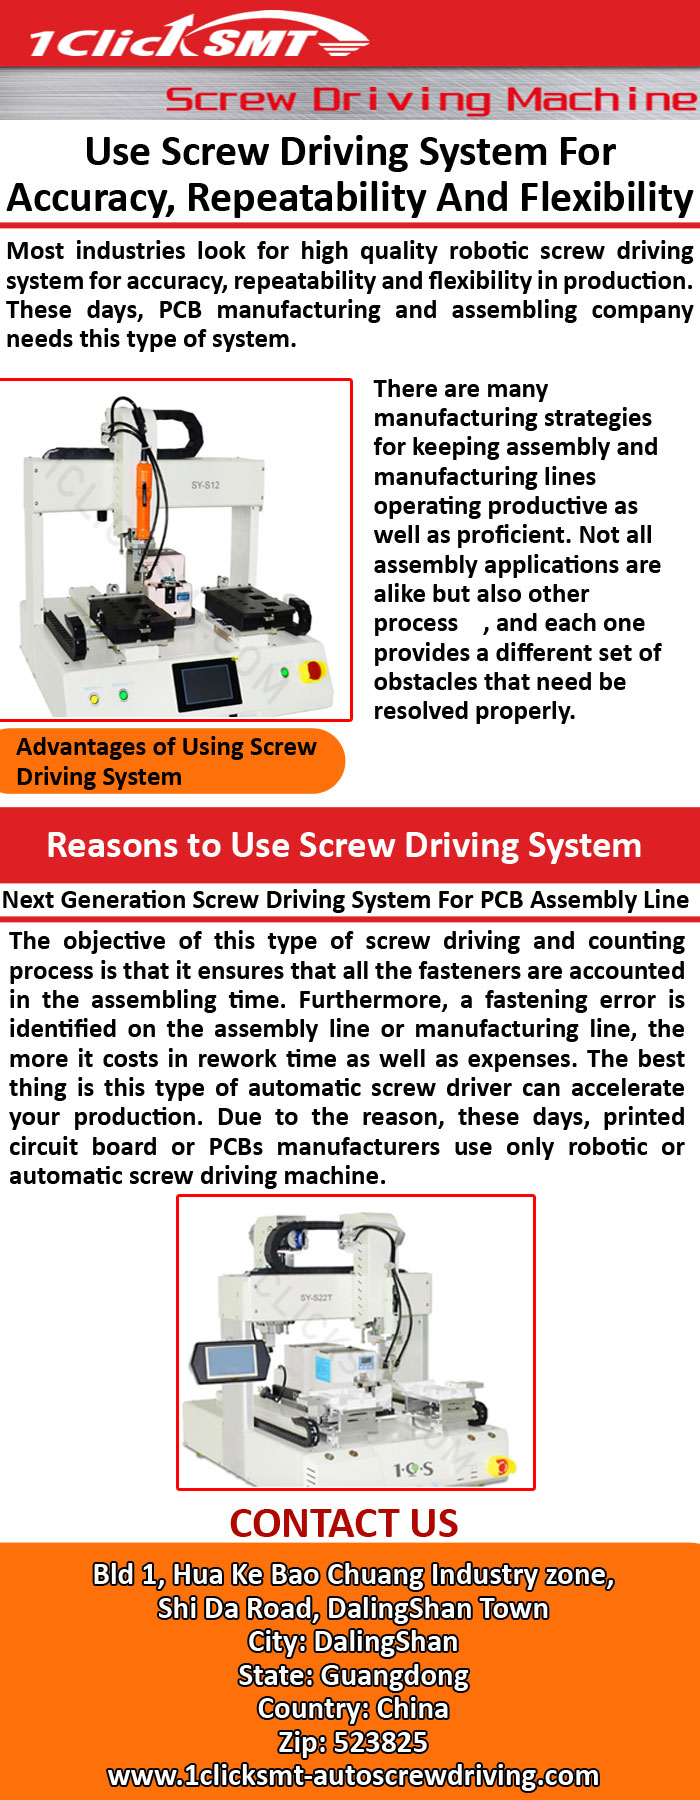 Use Screw Driving System For Accuracy, Repeatability And Flexibility.jpg  by autoscrewdriving